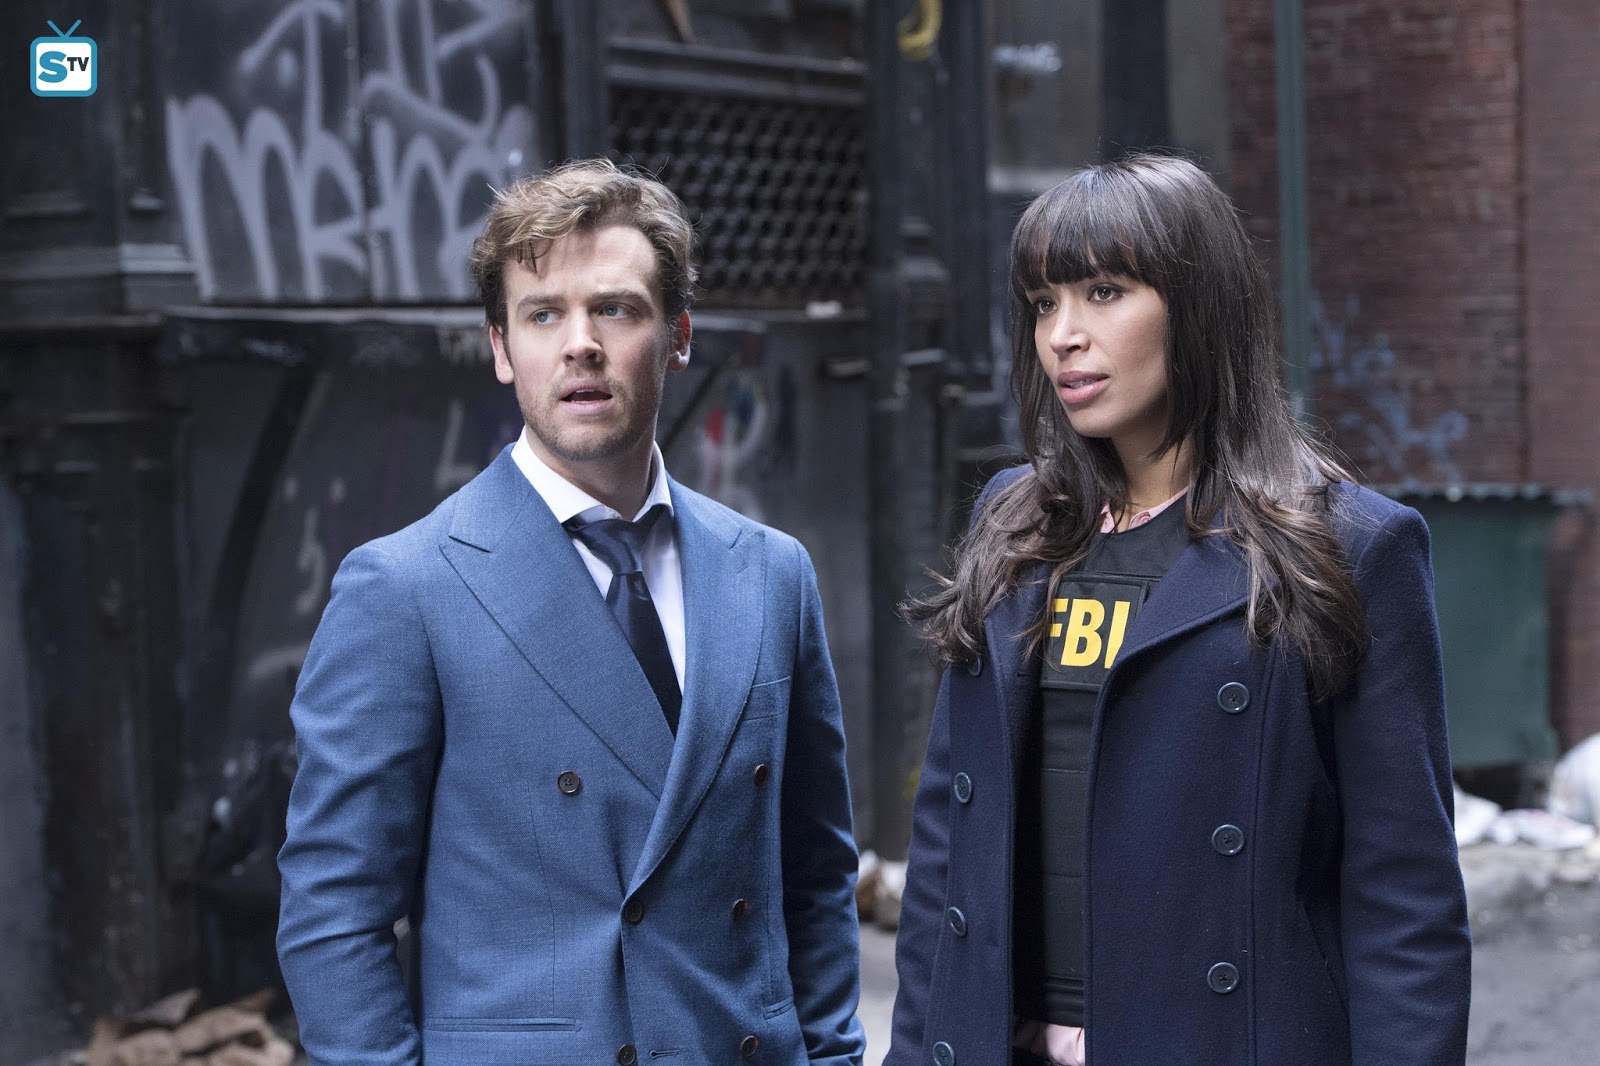 Deception - Pilot - Advance Review + Teasers: Is This Castle with Magic?